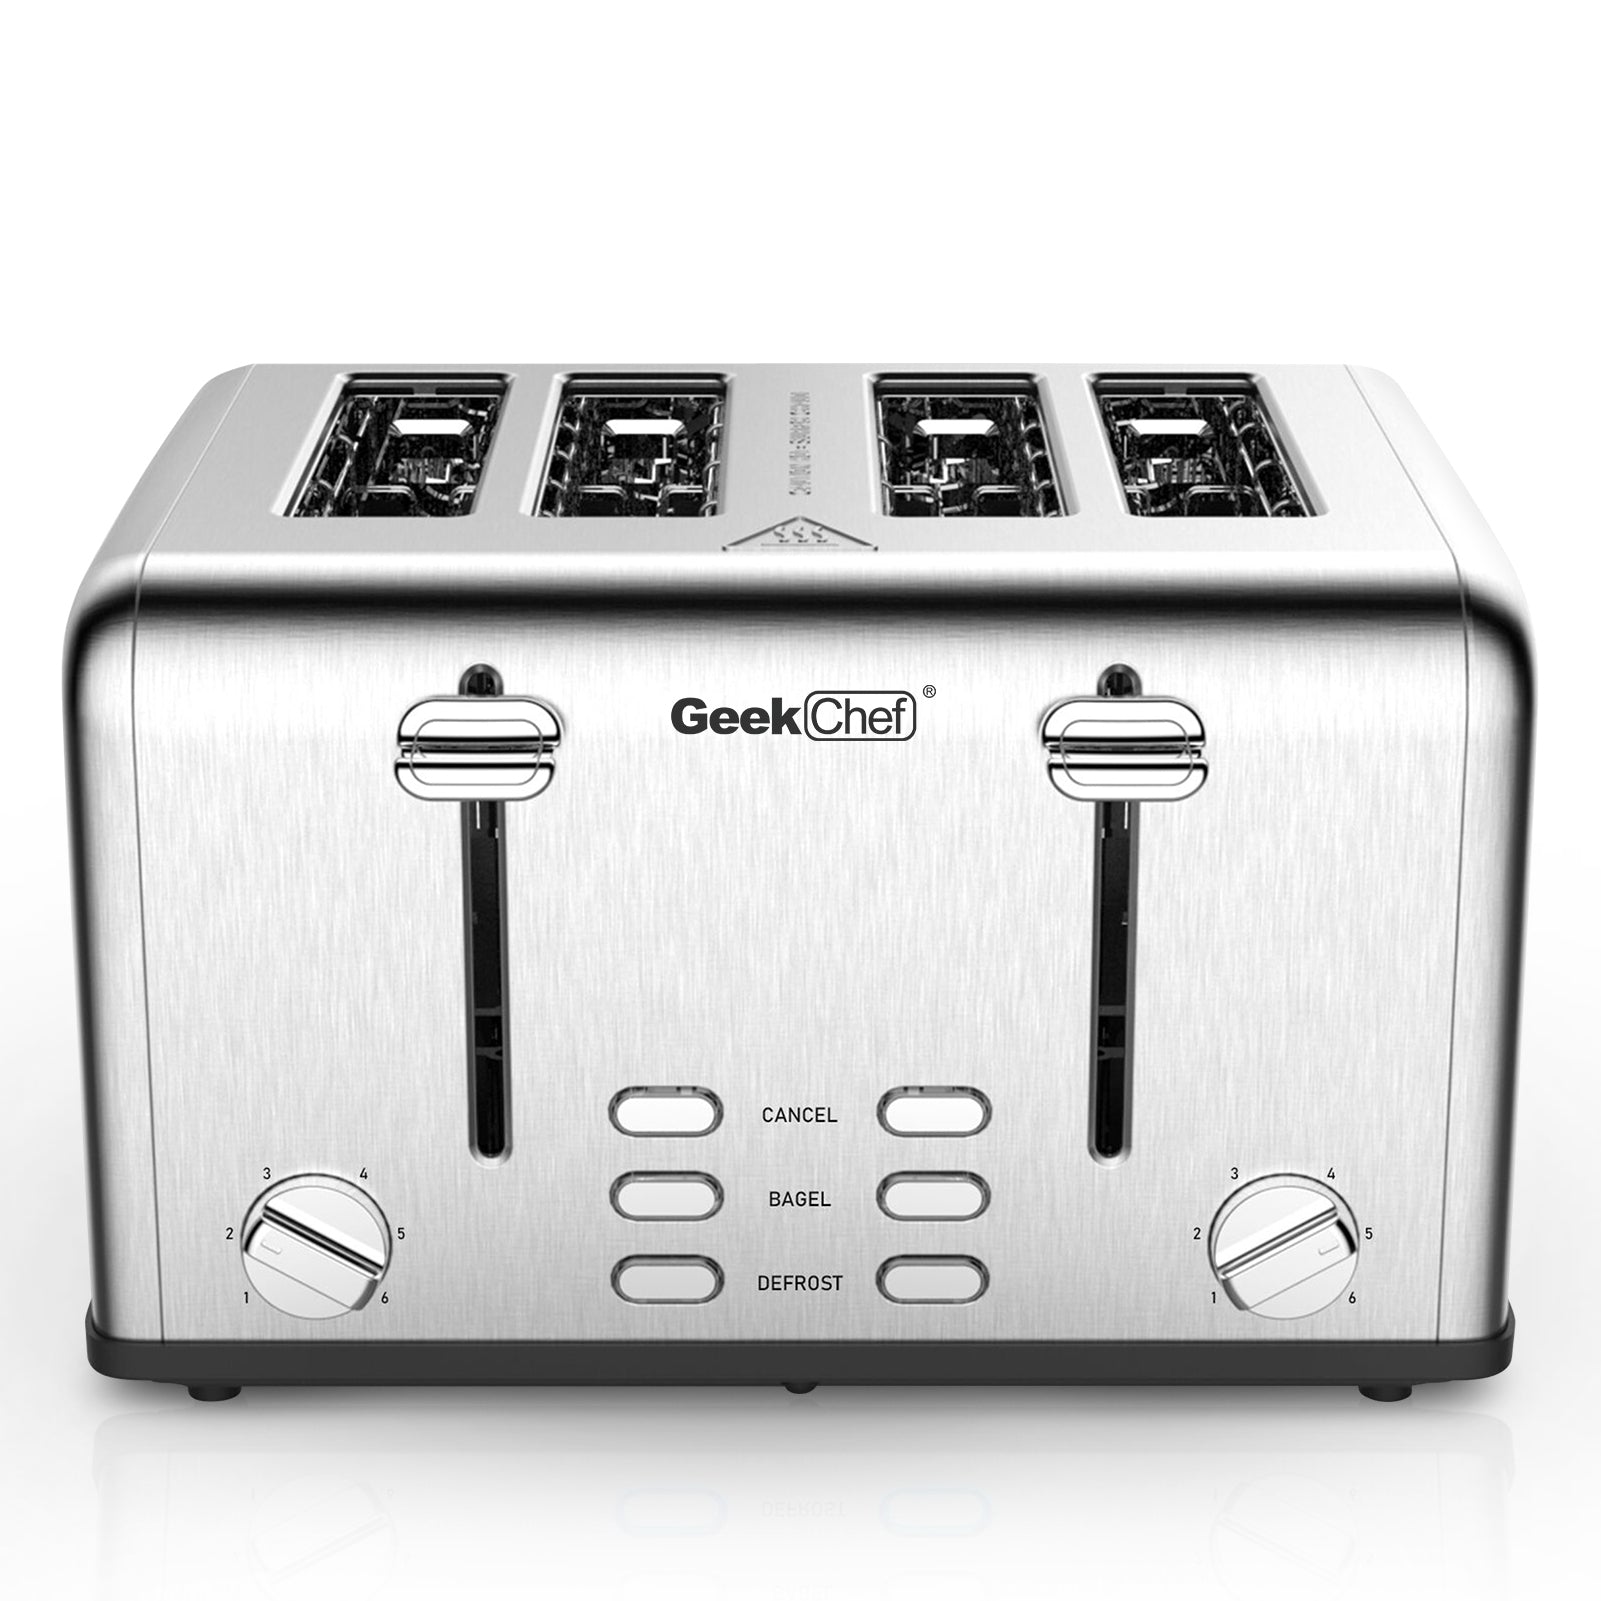 Toaster 4 Slice, Geek Chef Stainless Steel Extra-Wide Slot Toaster with Dual Control Panels of Bagel/Defrost/Cancel Function, 6 Toasting Bread Shade Settings, Removable Crumb Trays Ban on Amazon